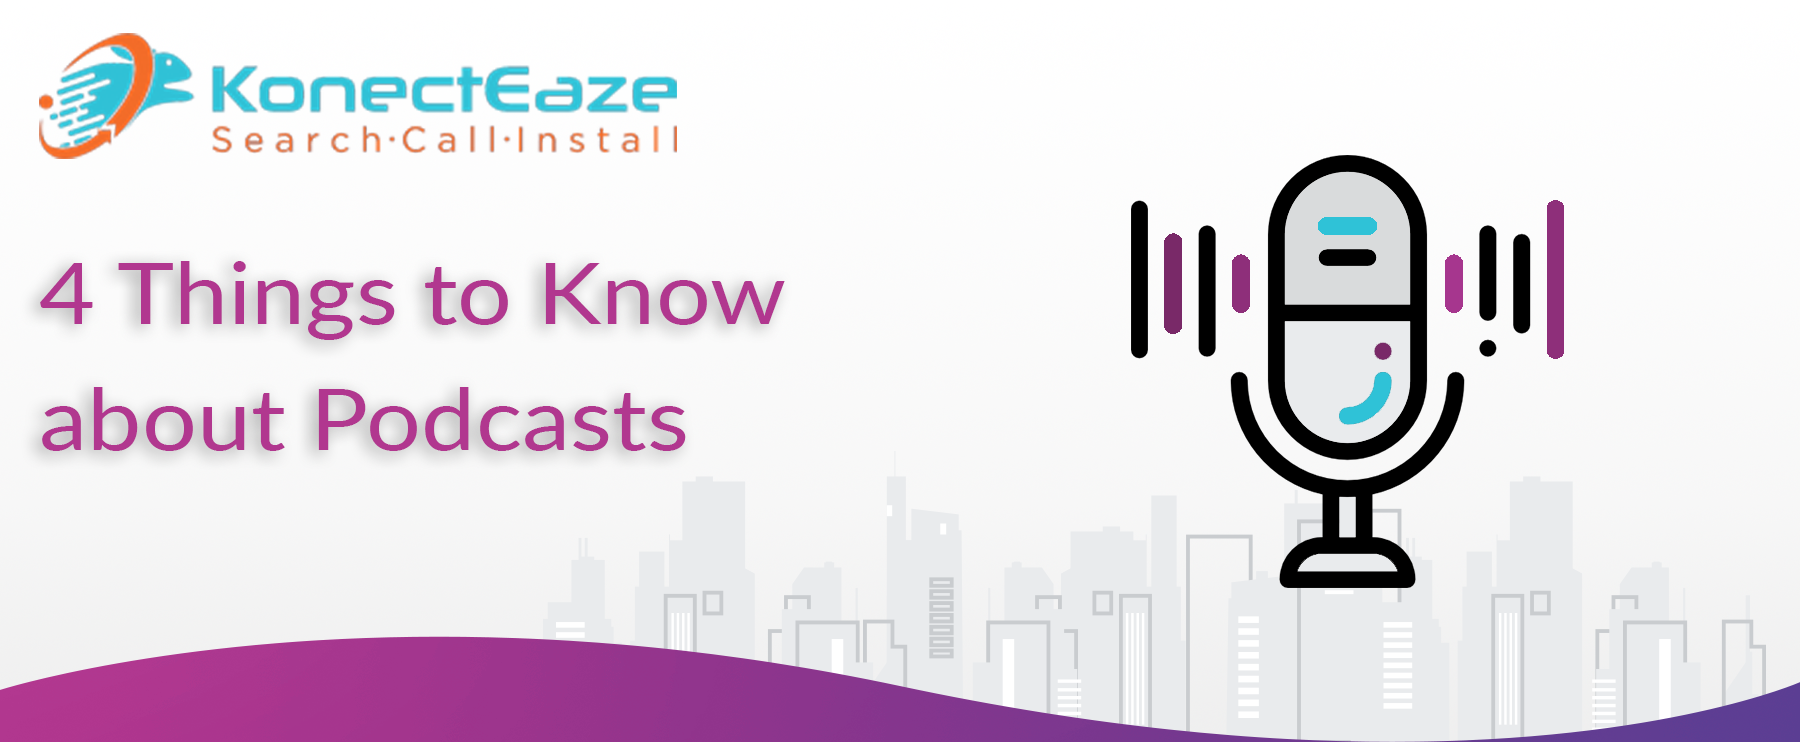 4 Things to Know about Podcasts